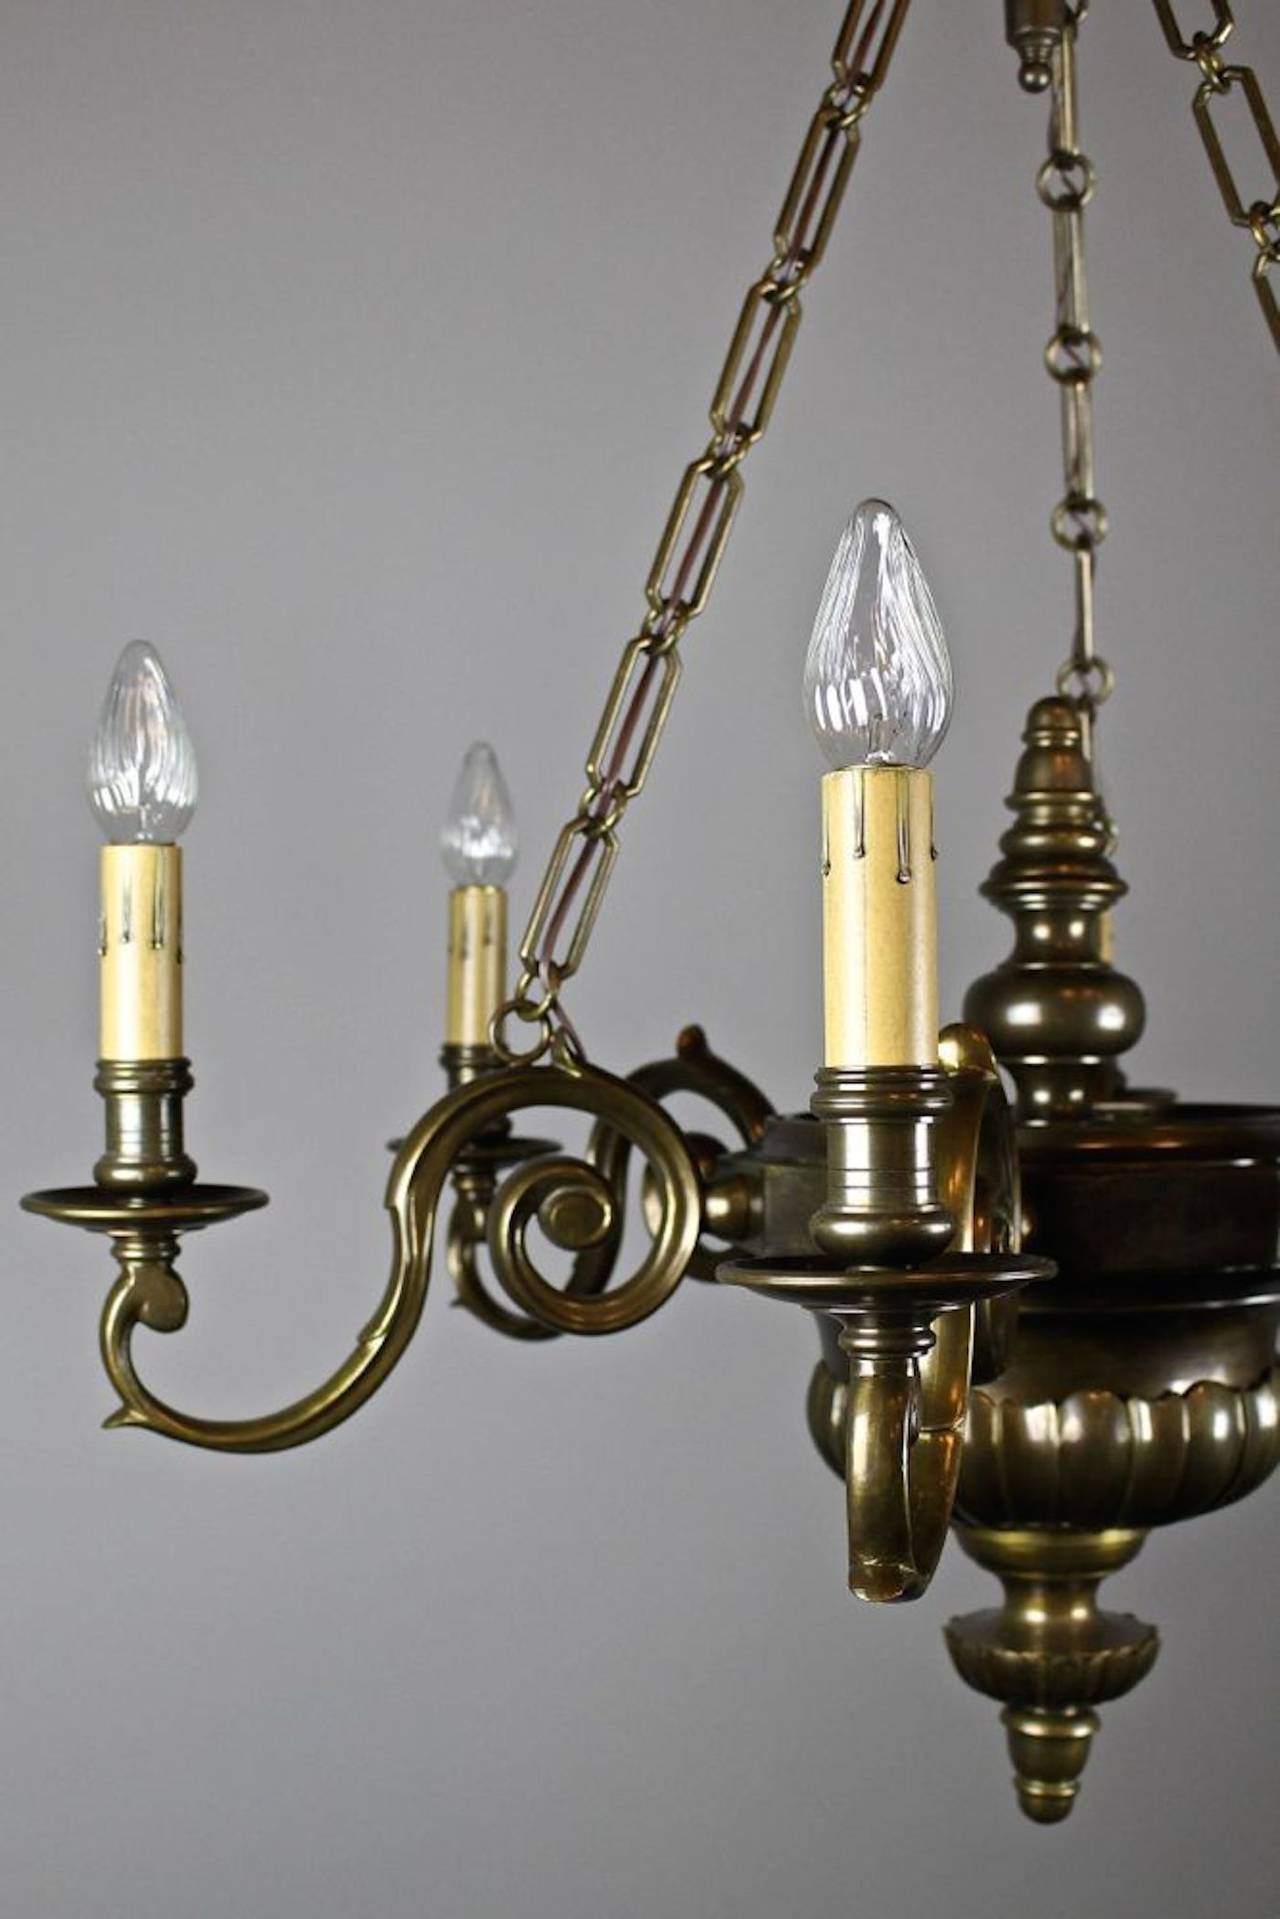 Early 20th Century Large Sheffield Style Lighting Fixture with Candle Arms (6-light) For Sale